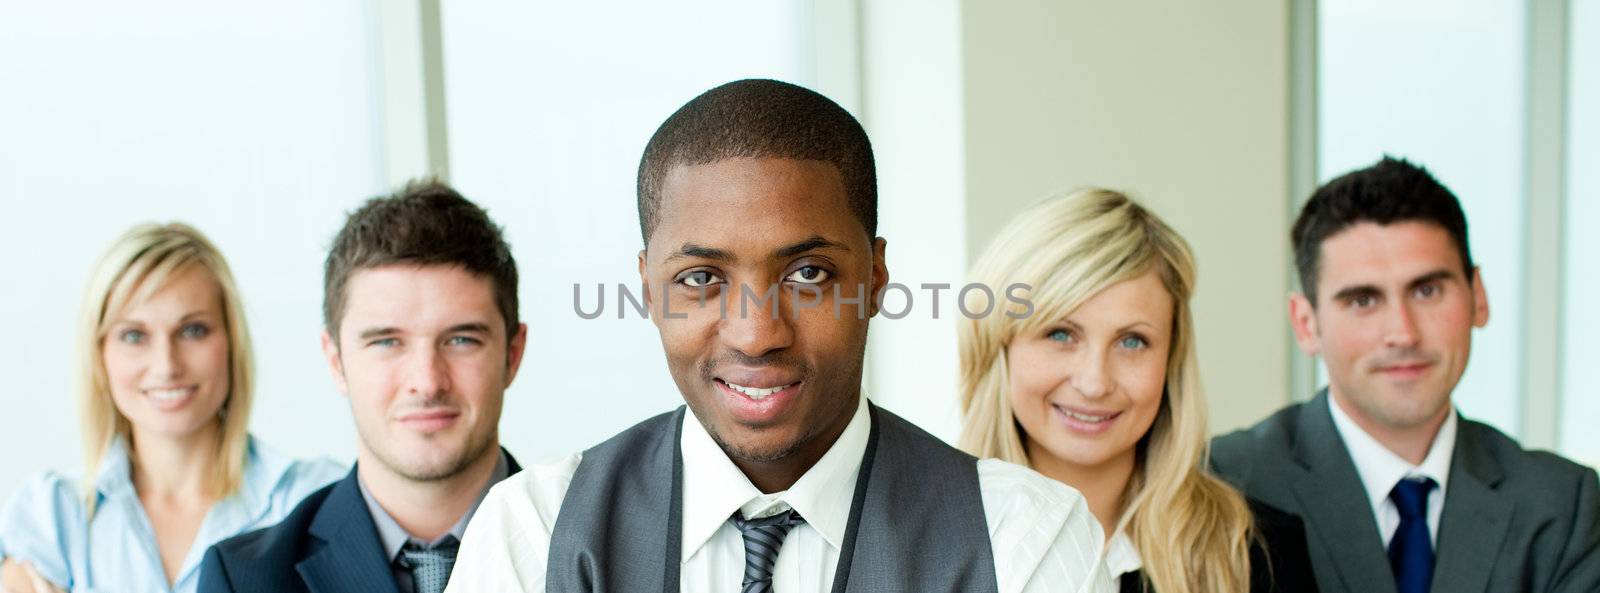 Business team in a row with ethnic manager in the center by Wavebreakmedia